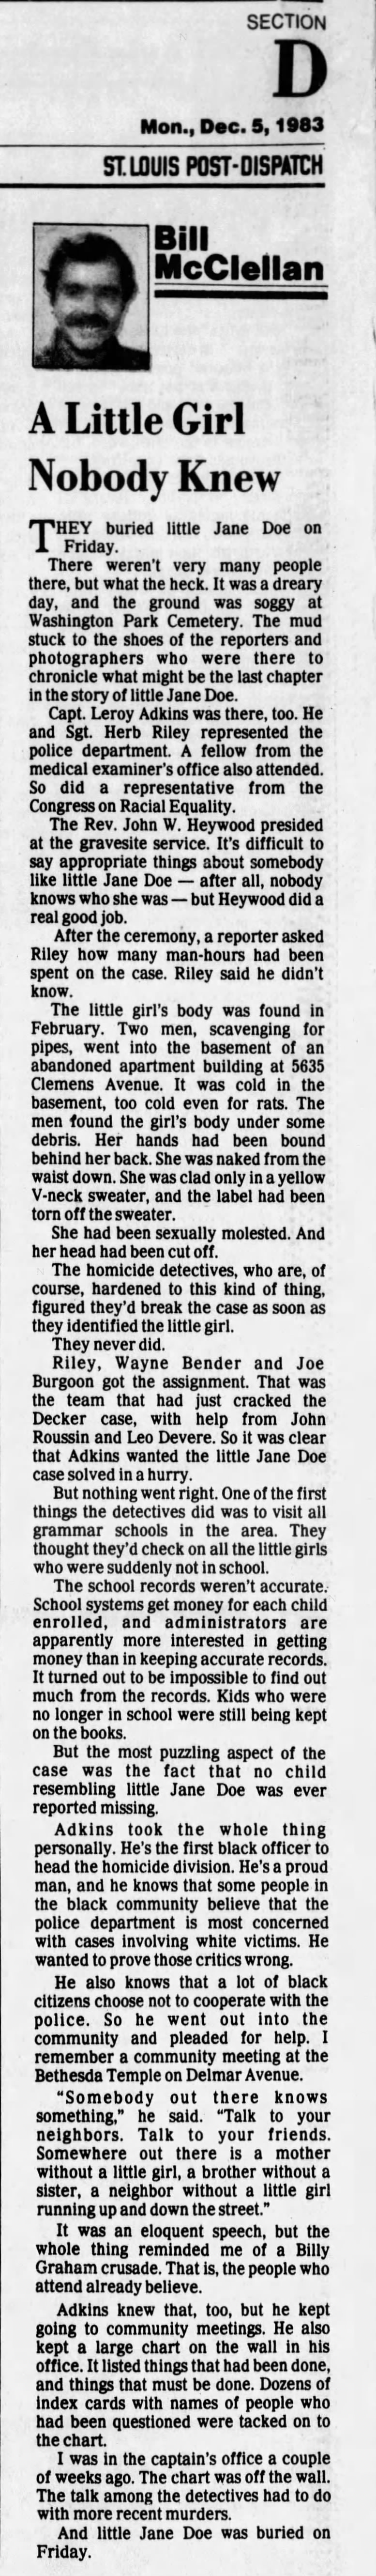 Little Jane Doe 1983, unsolved murder, decapitated child